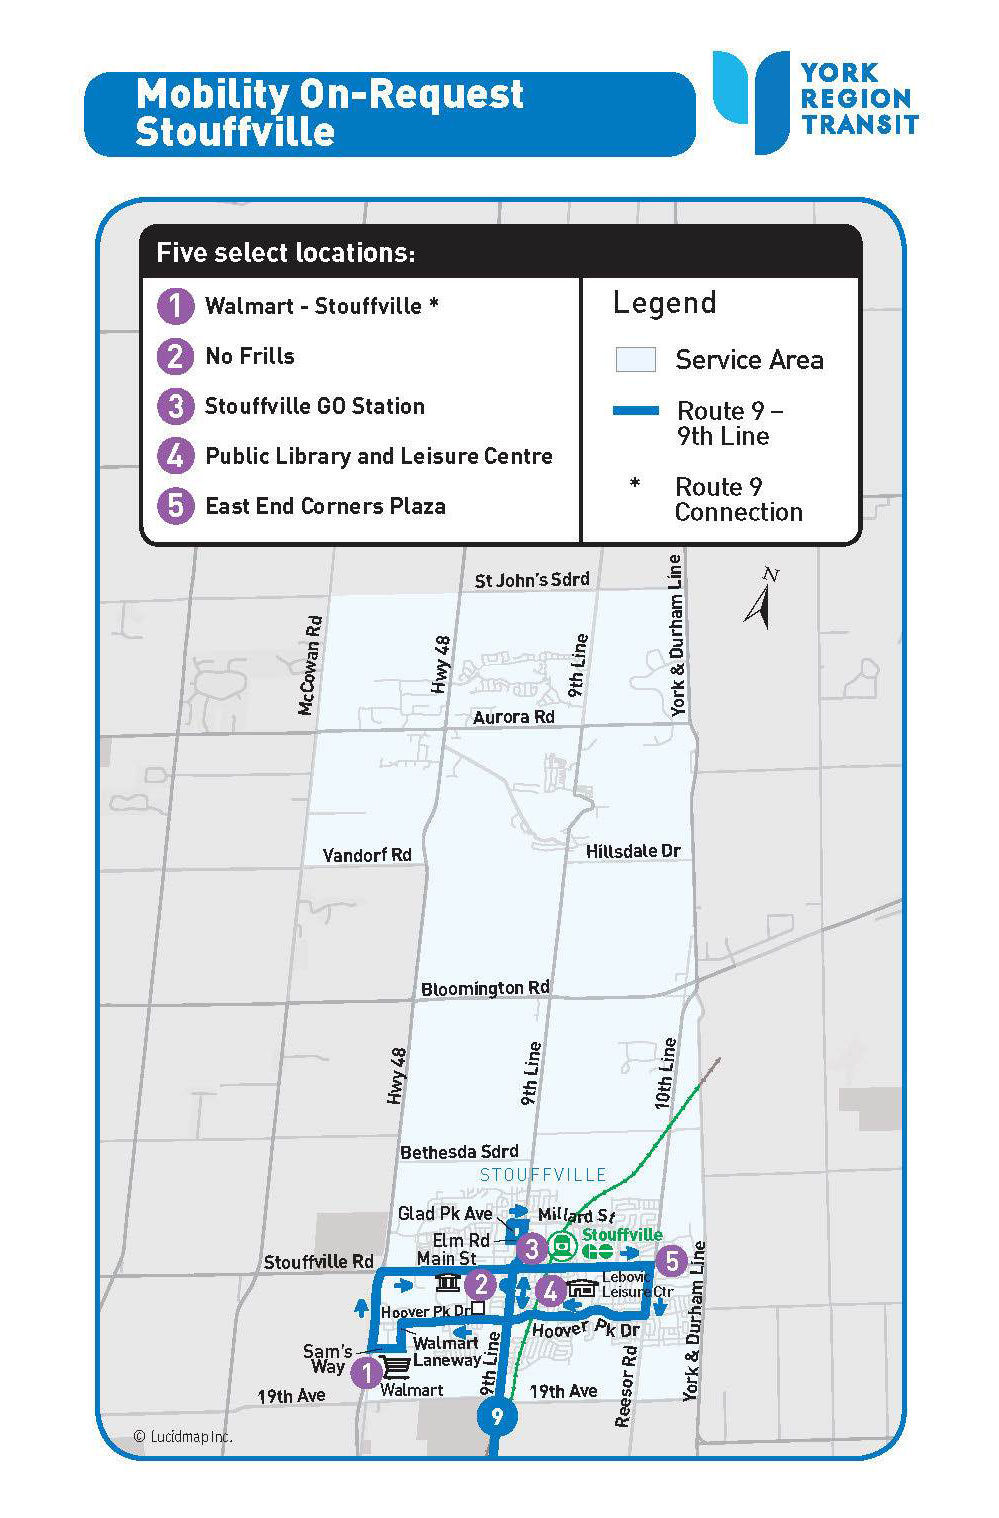 The Mobility On-Request service map for Stouffville